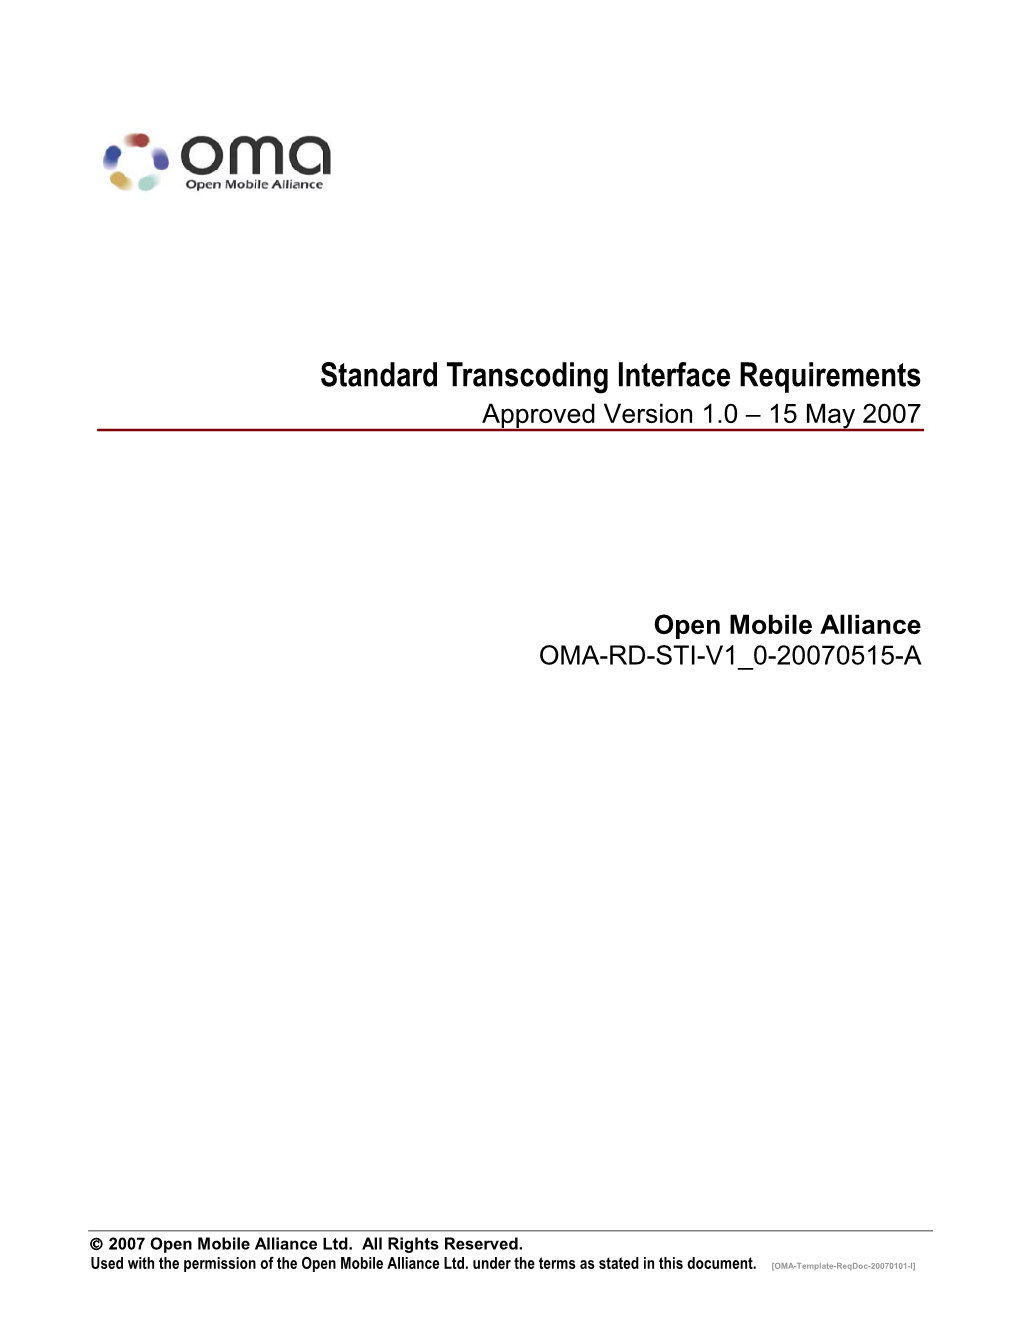 Standard Transcoding Interface Requirements Approved Version 1.0 – 15 May 2007